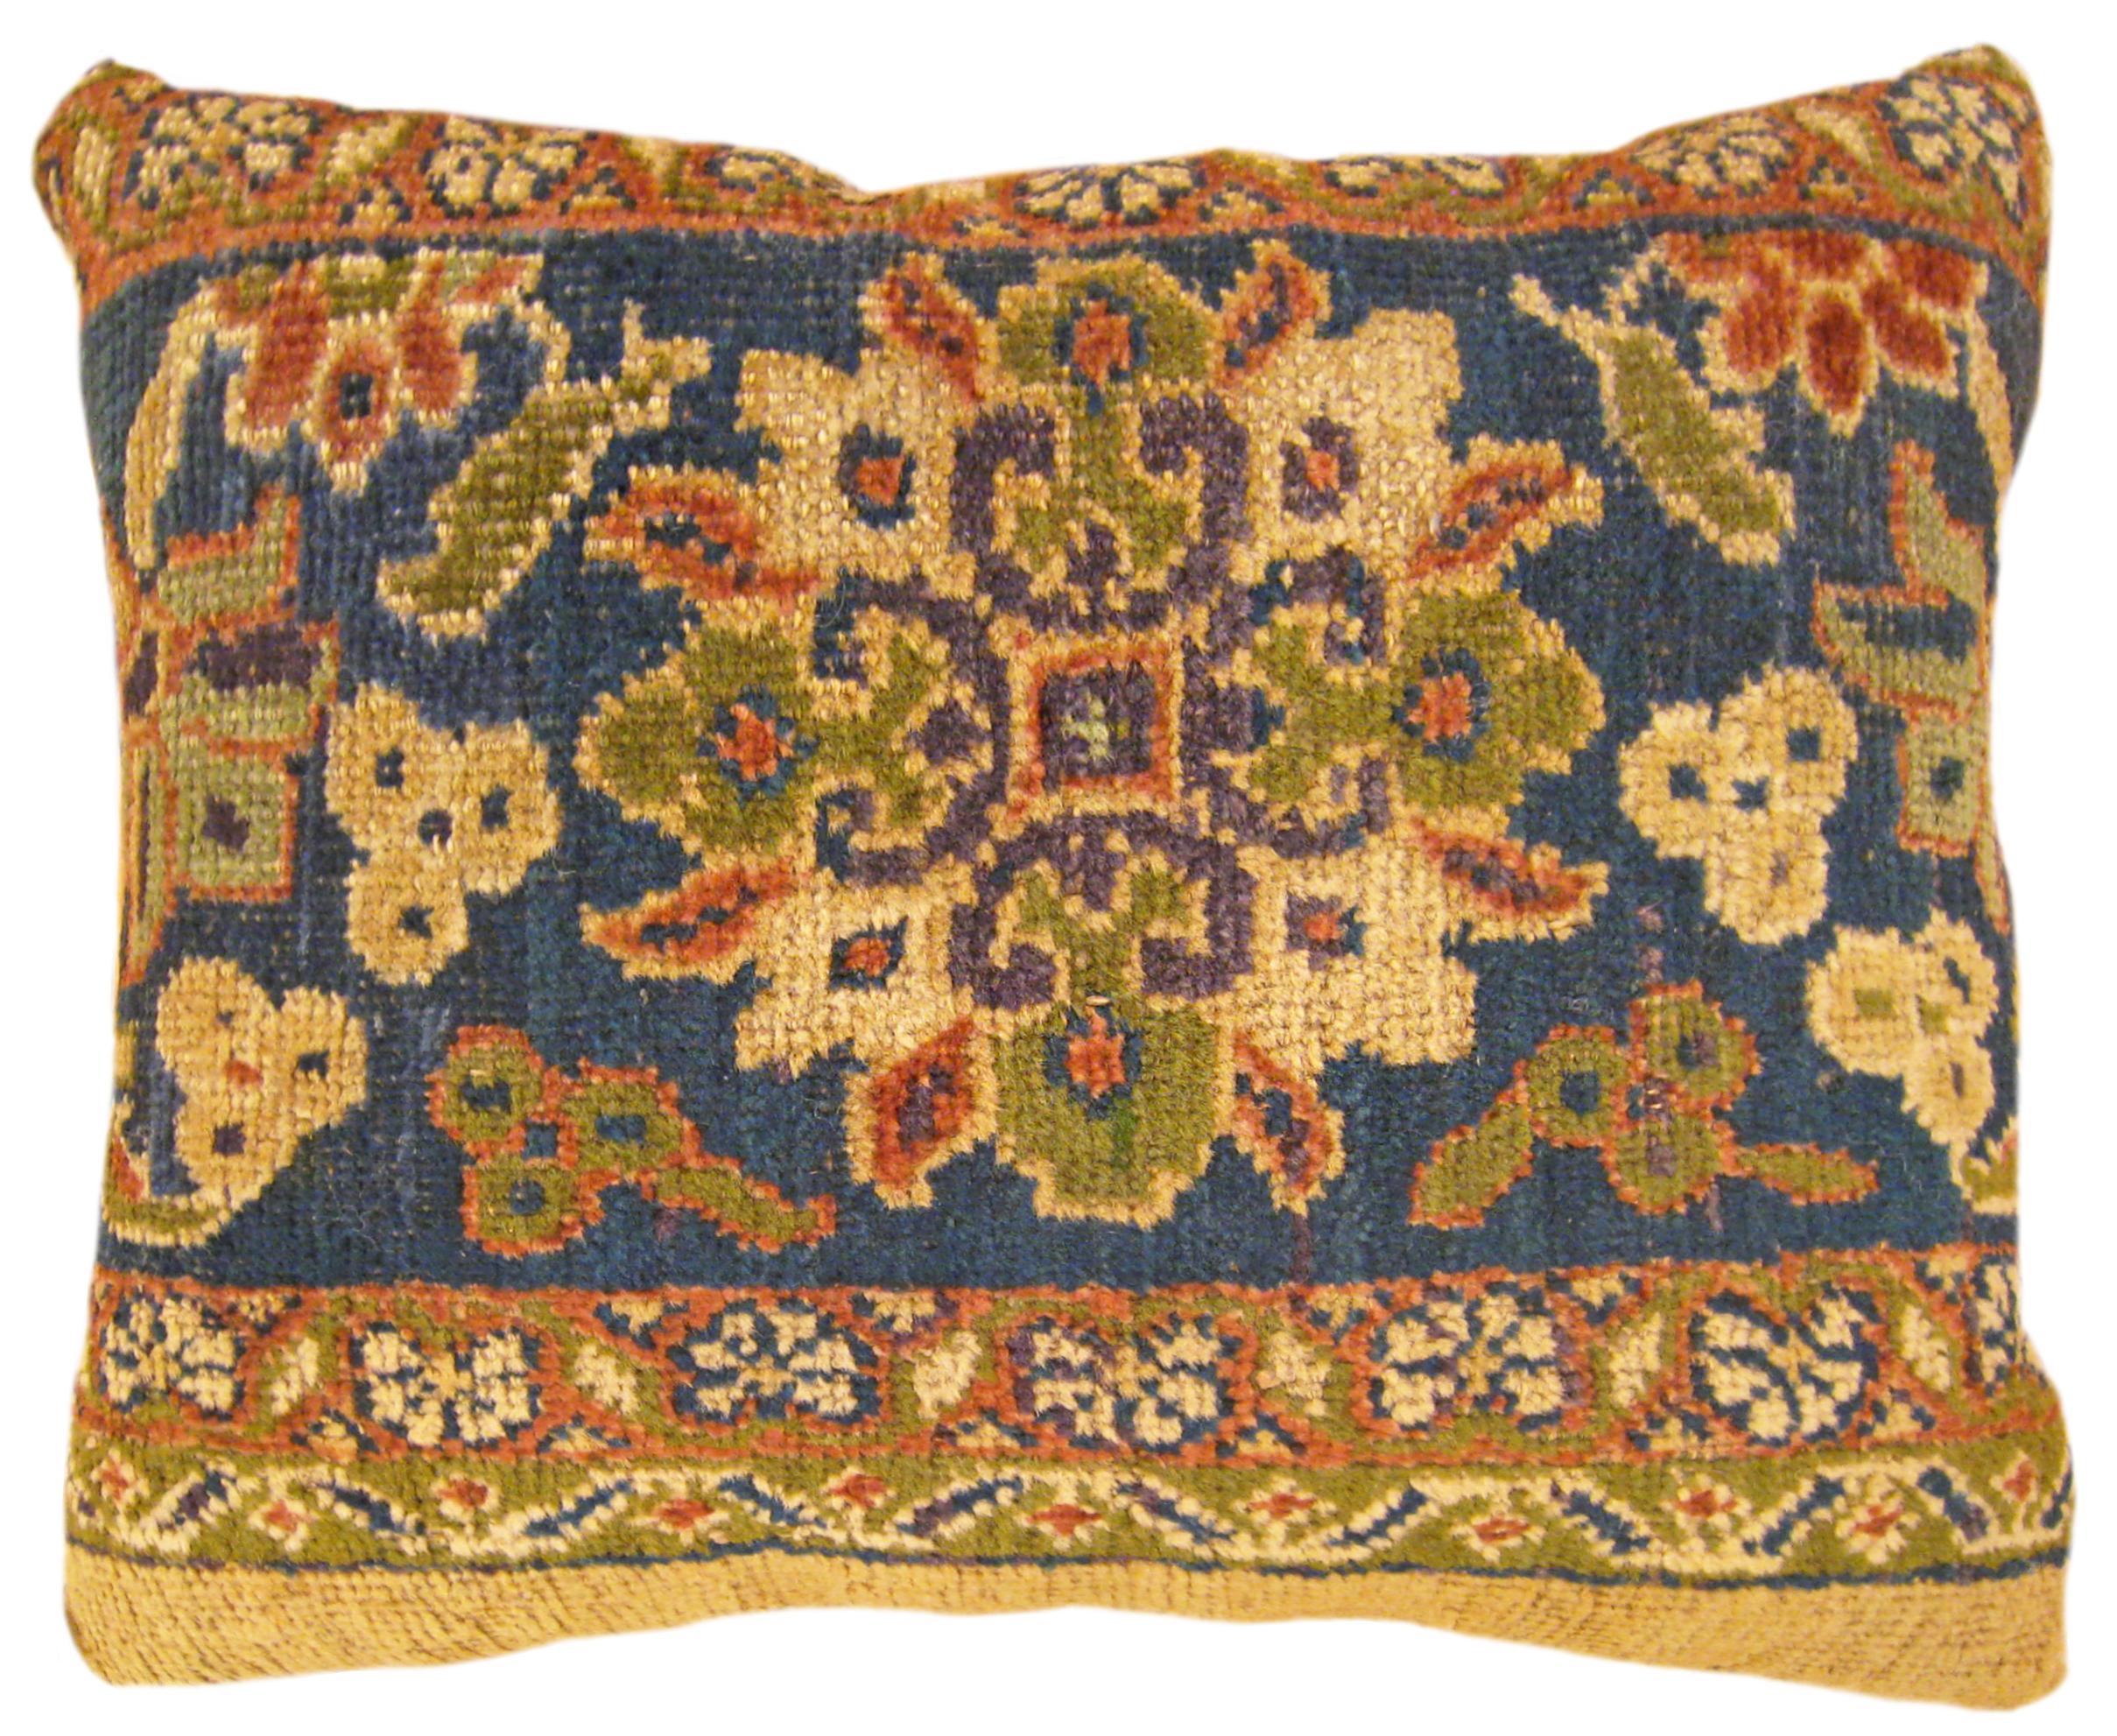 Pari of Decorative Antique Persian Sultanabad Carpet Pillows with Floral For Sale 2